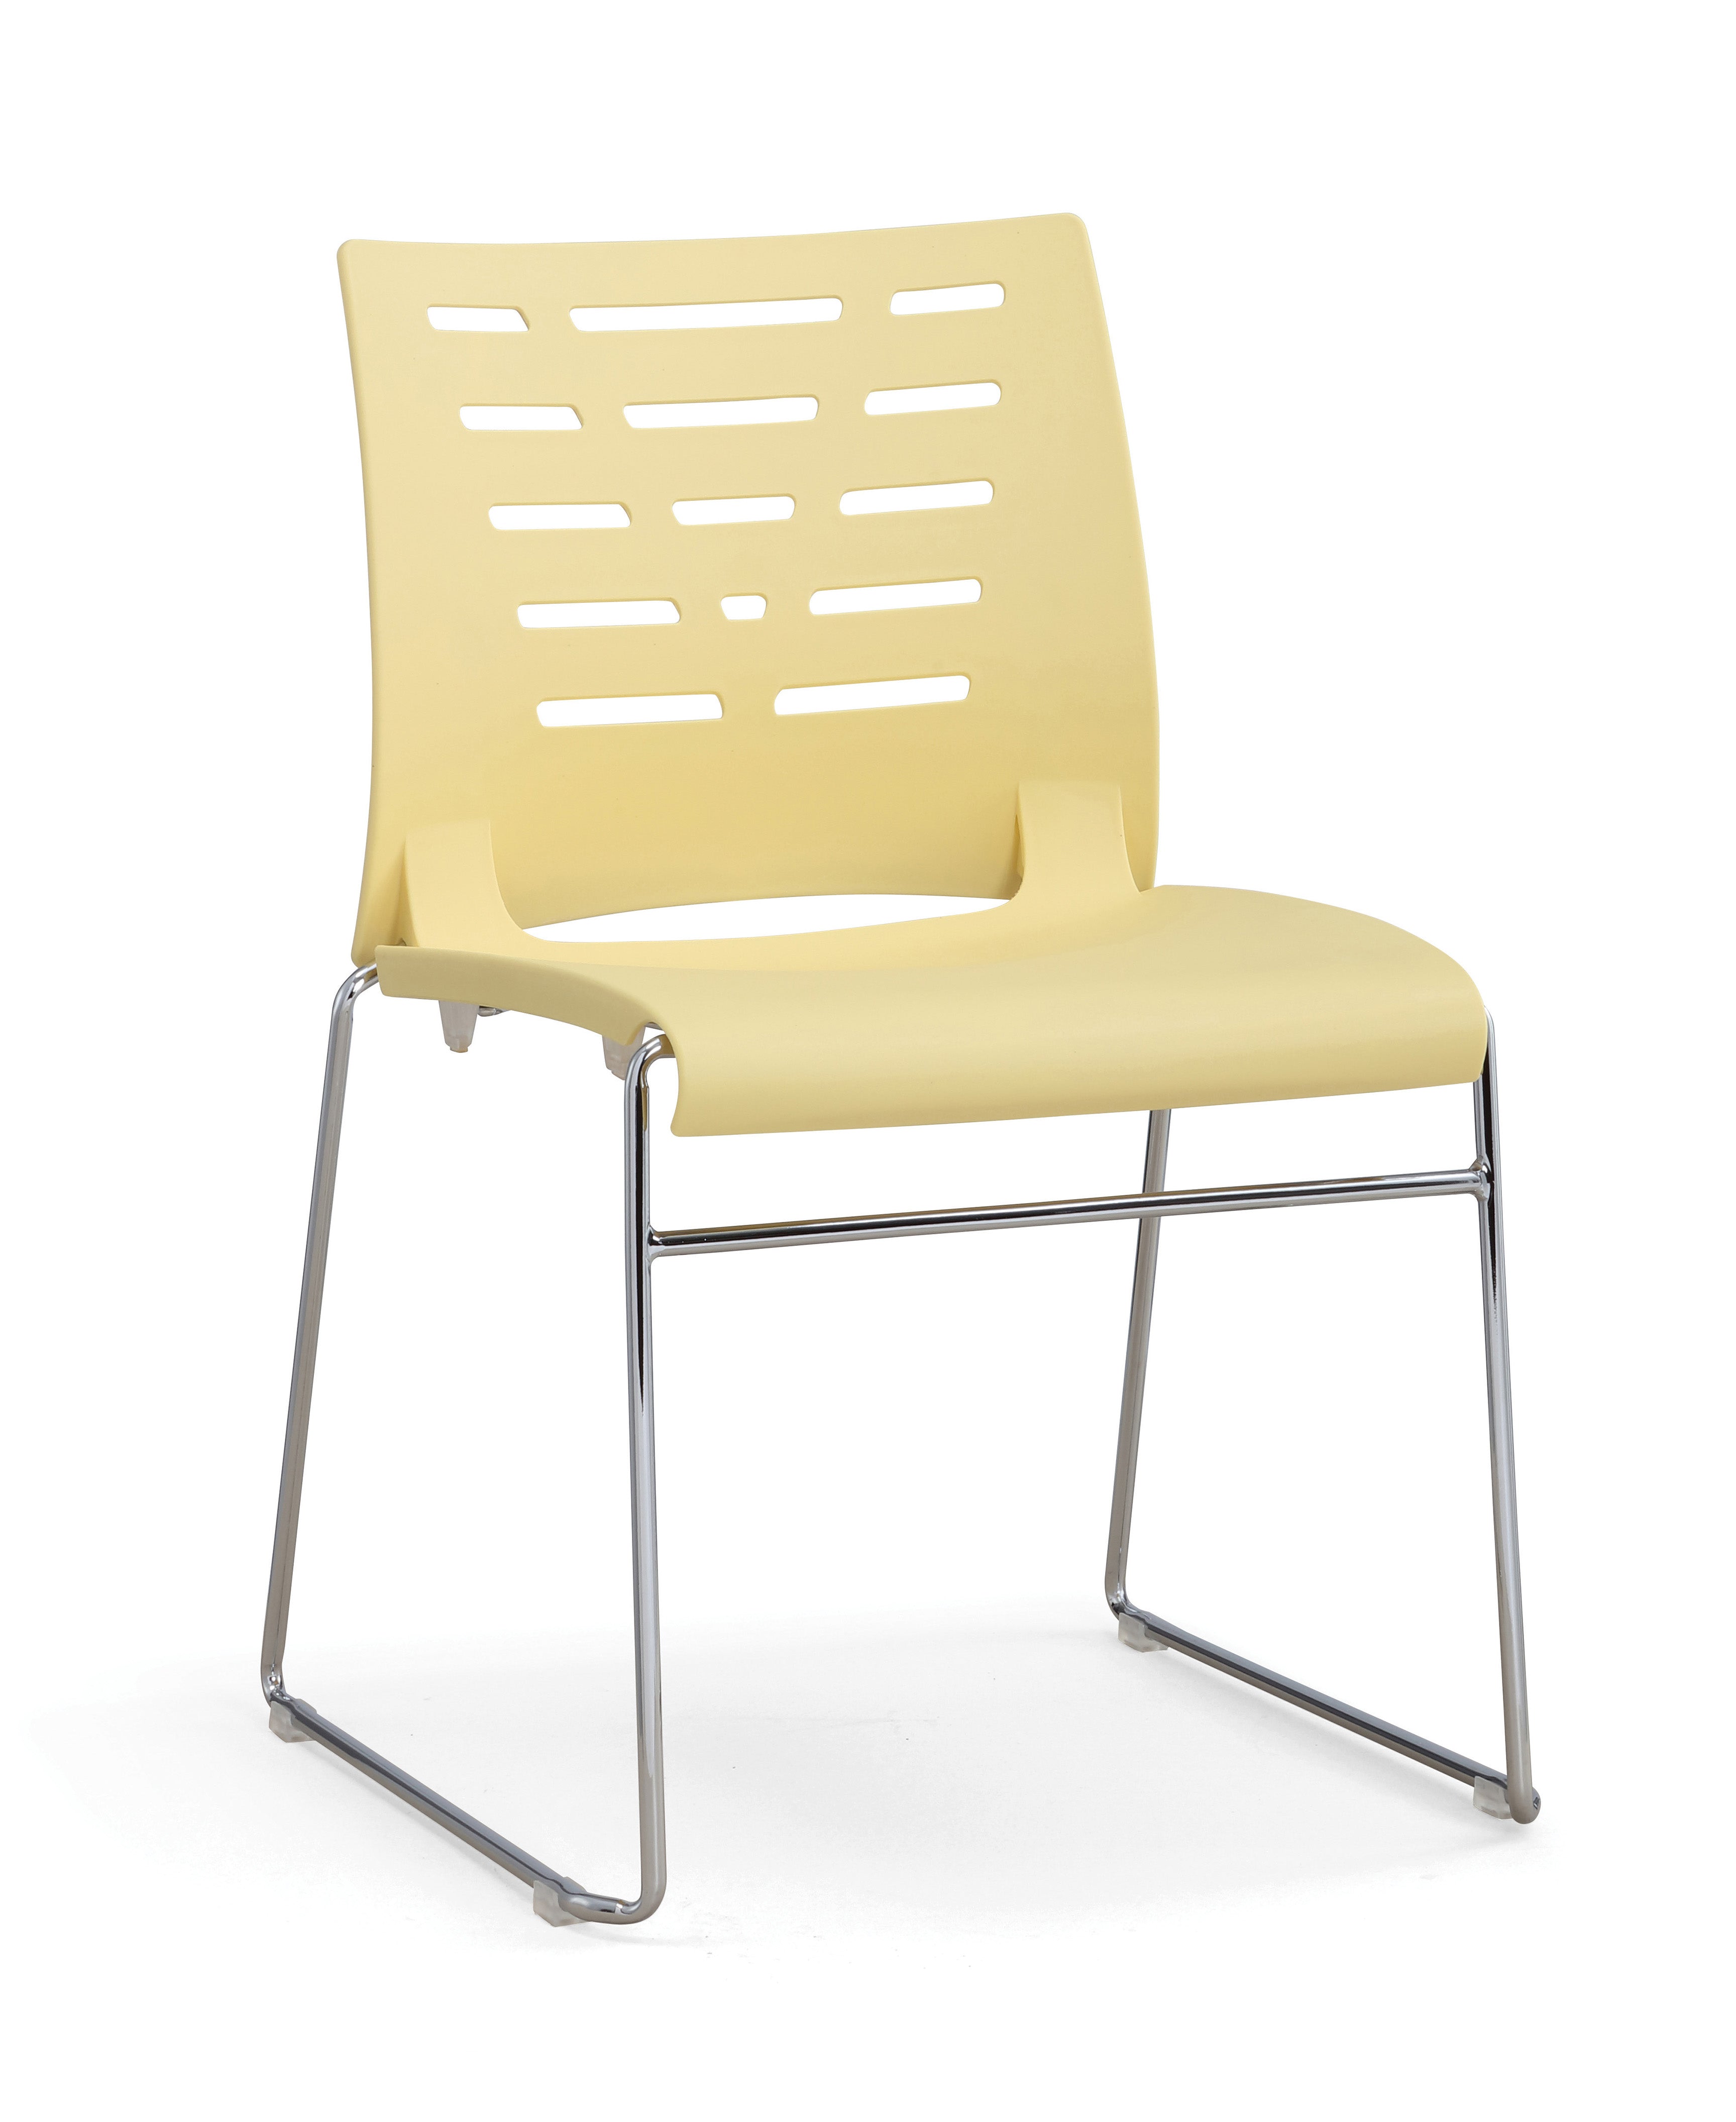 Contemporary plastic back party chair | HOG - Home. Office. Garden online marketplace